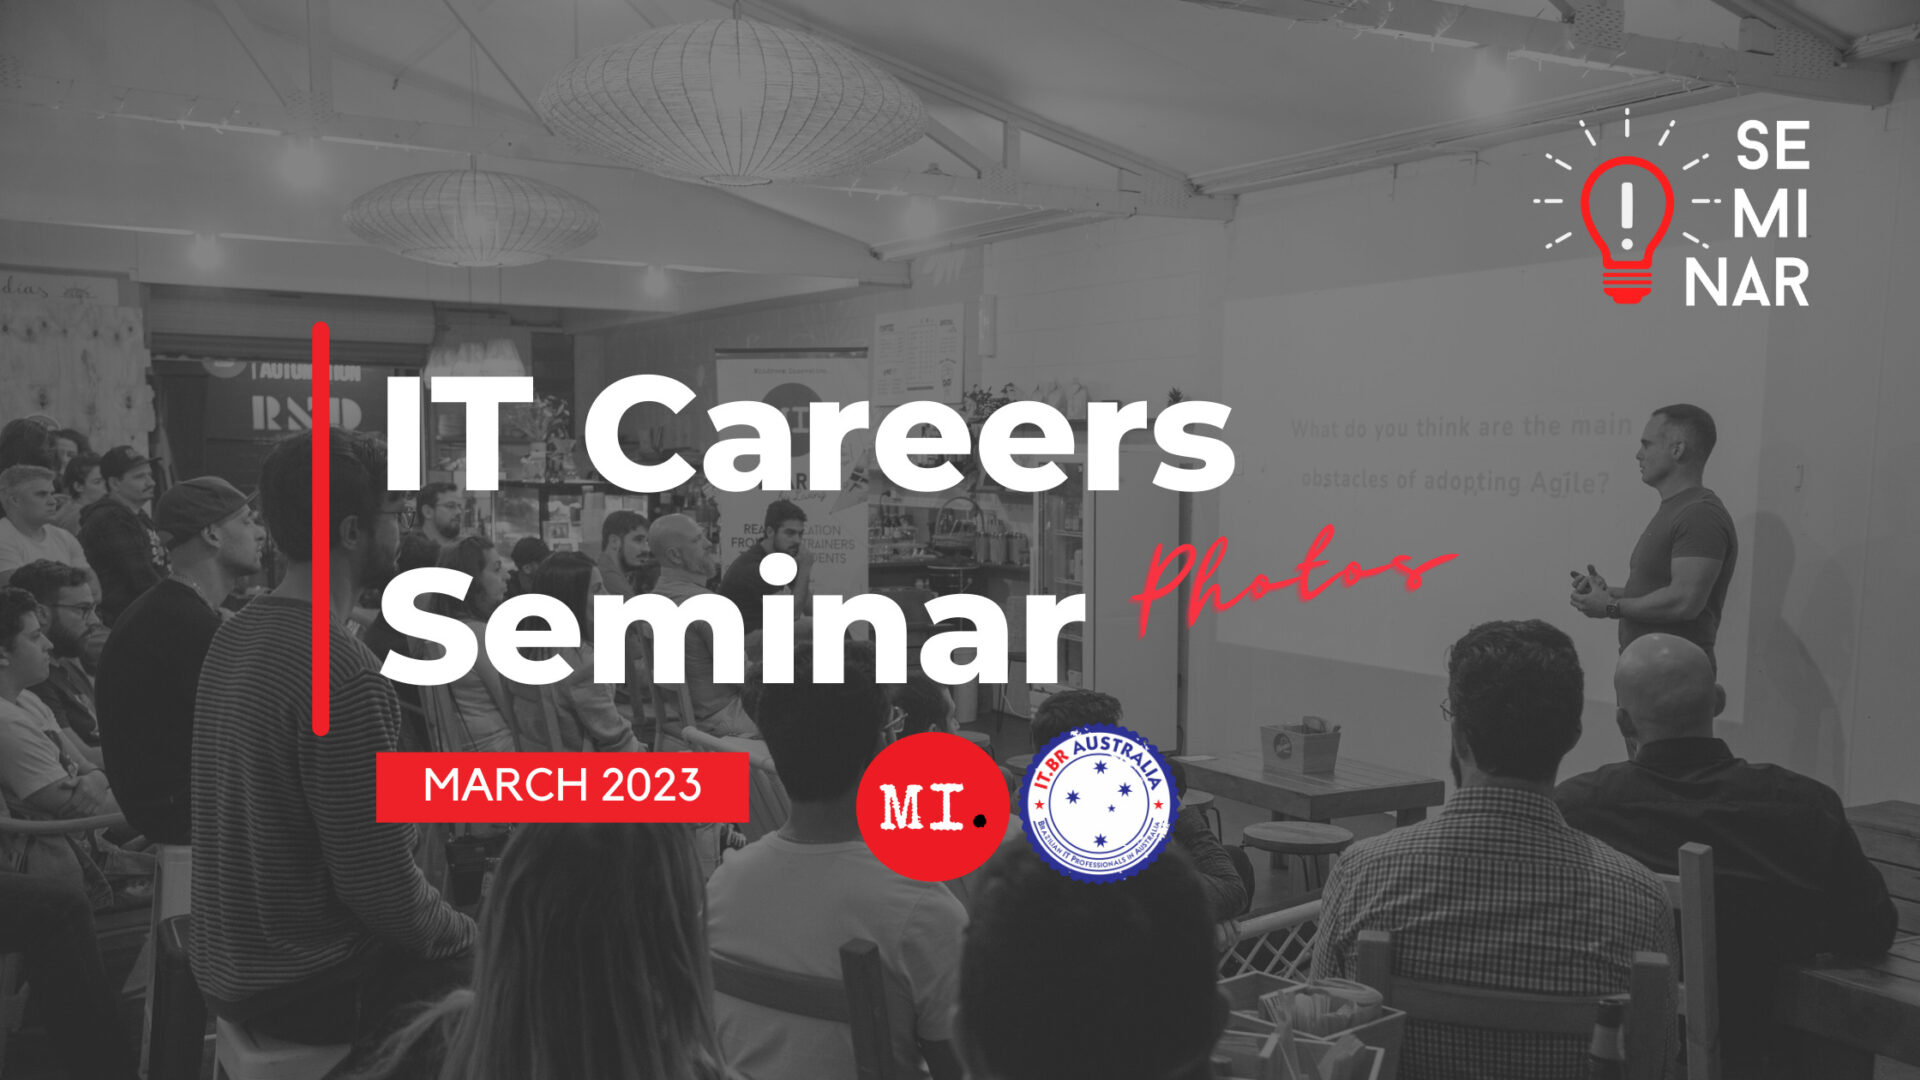 Capturing the Excitement: A Visual Recap of Our March IT Careers Seminar